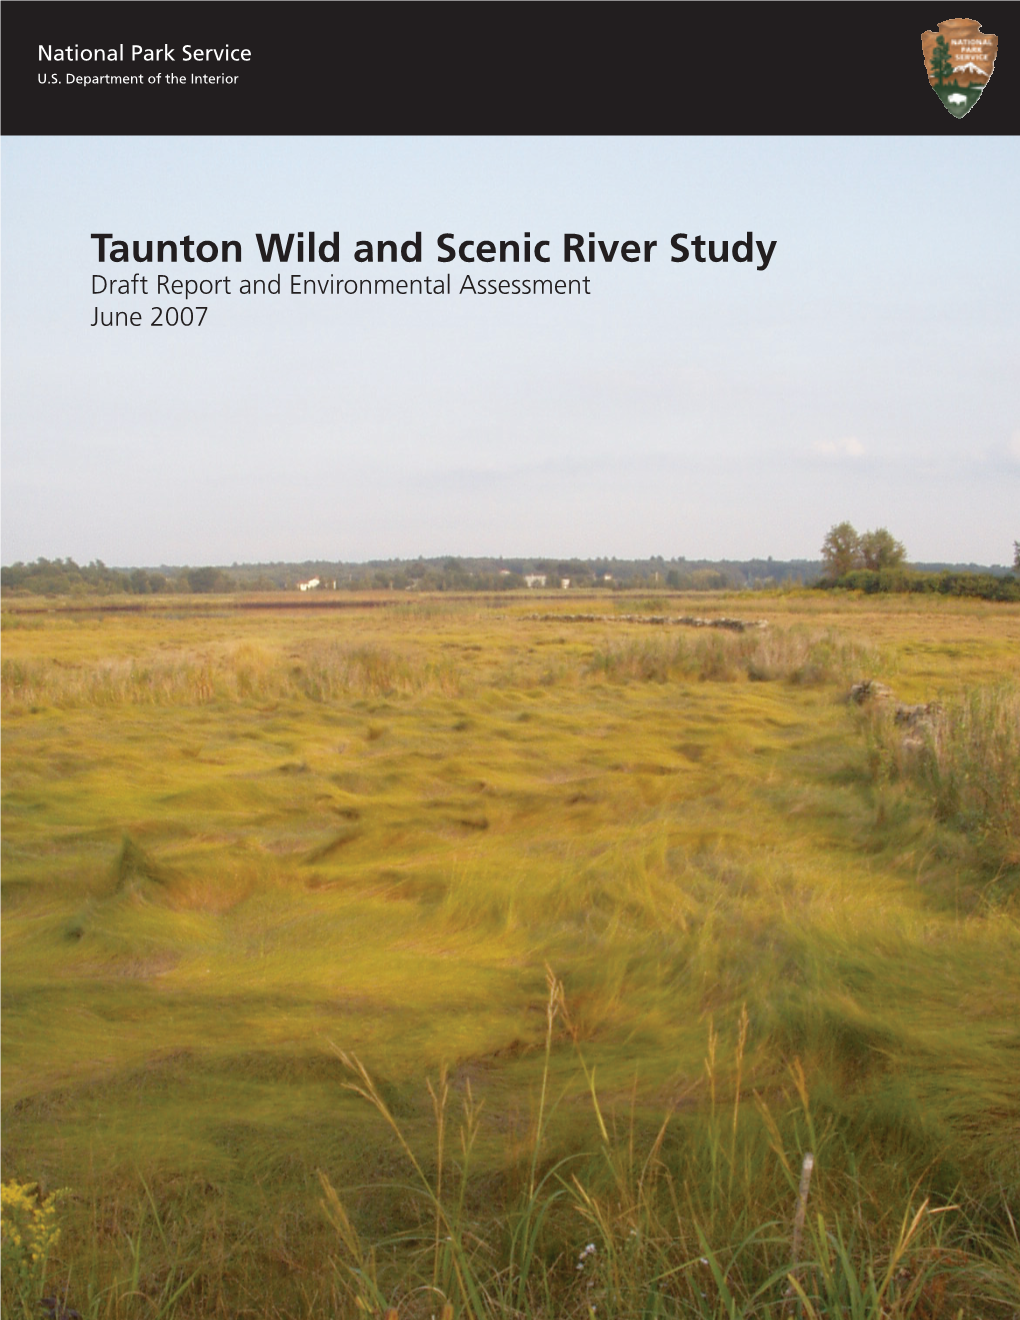 Taunton Wild and Scenic River Study Draft Report and Environmental Assessment June 2007